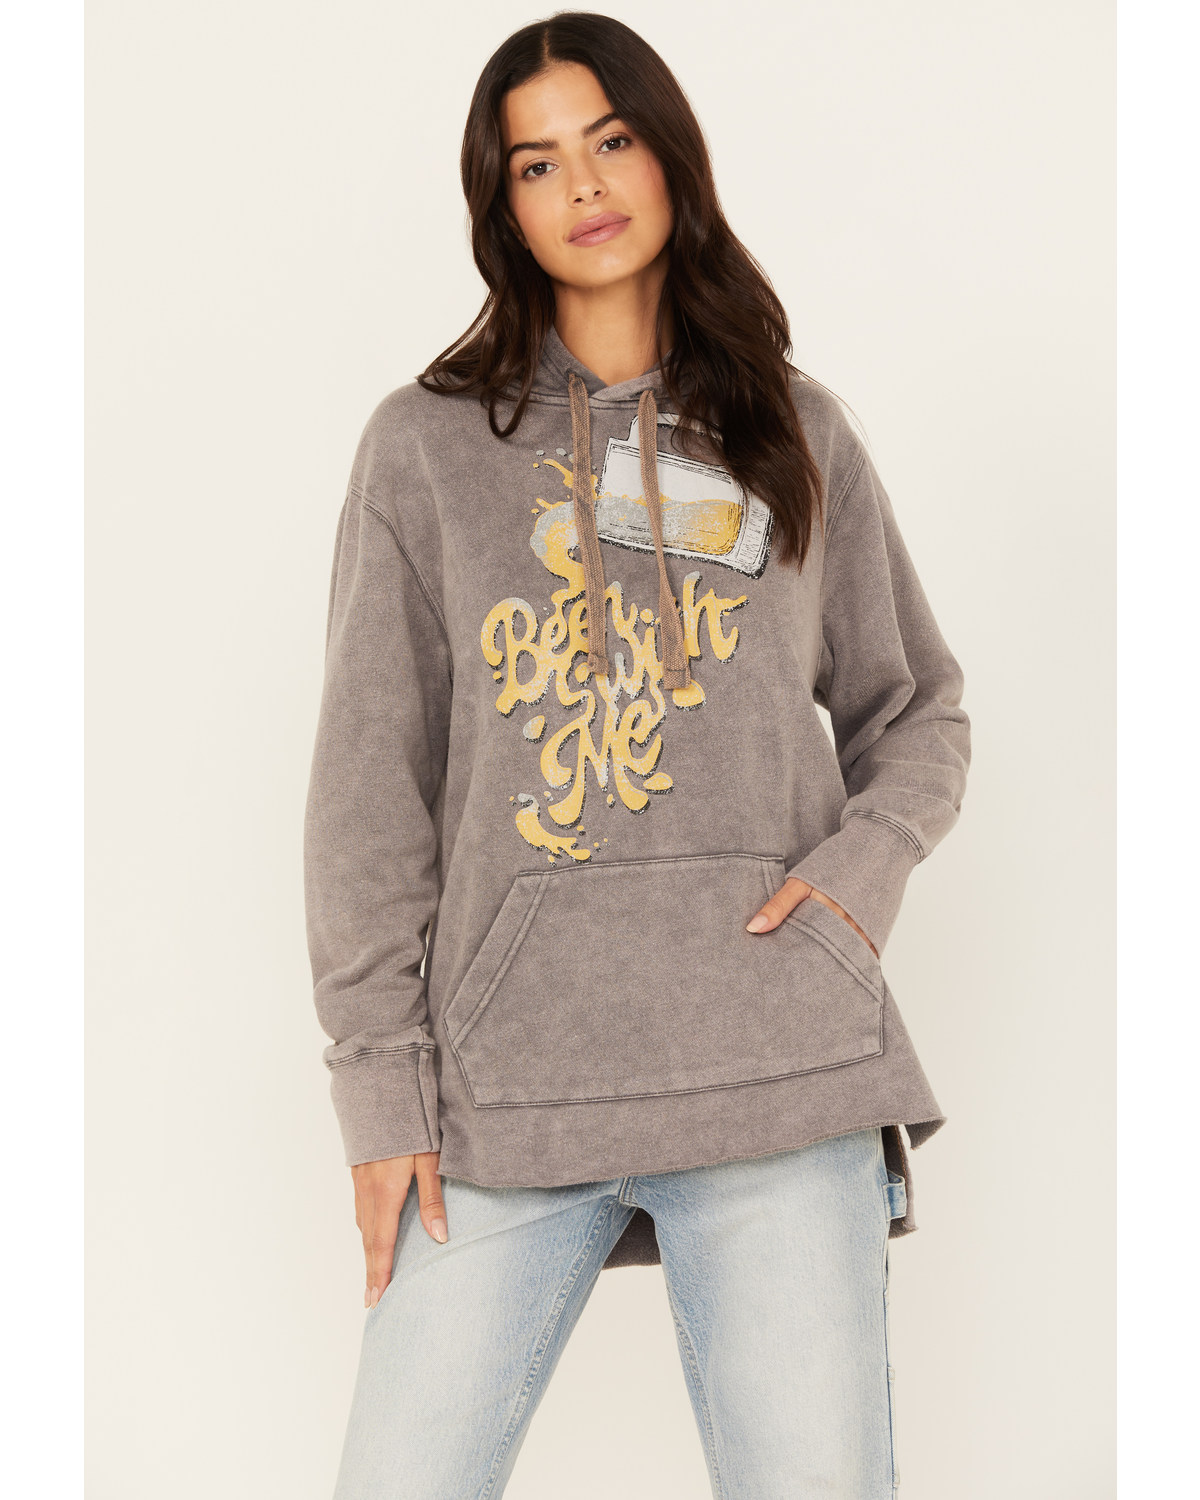 Cleo + Wolf Women's Beer With Me Washed Graphic Hoodie